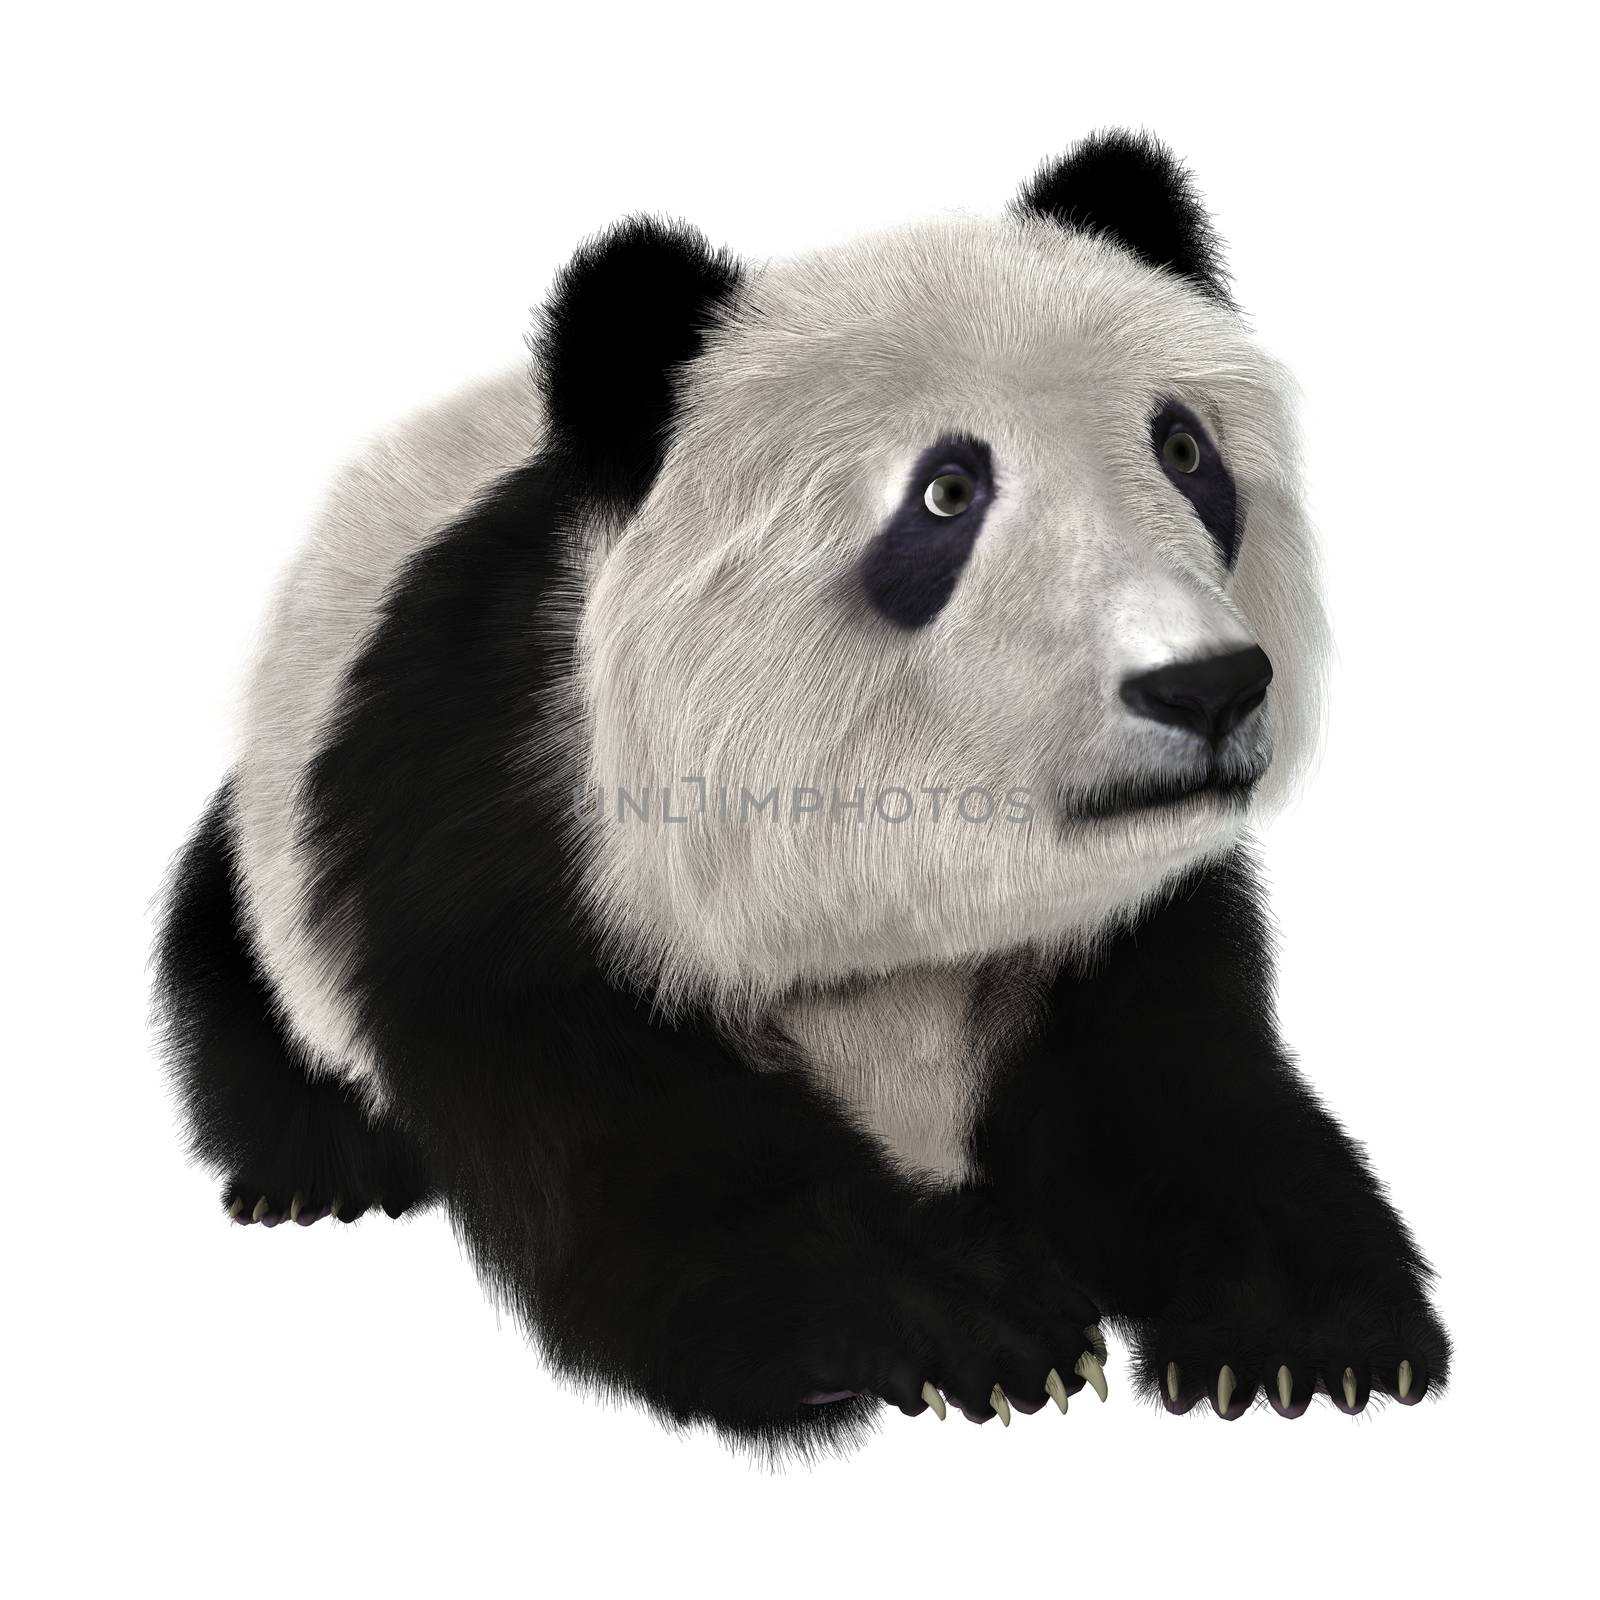 3D digital render of a panda bear cub resting isolated on white background